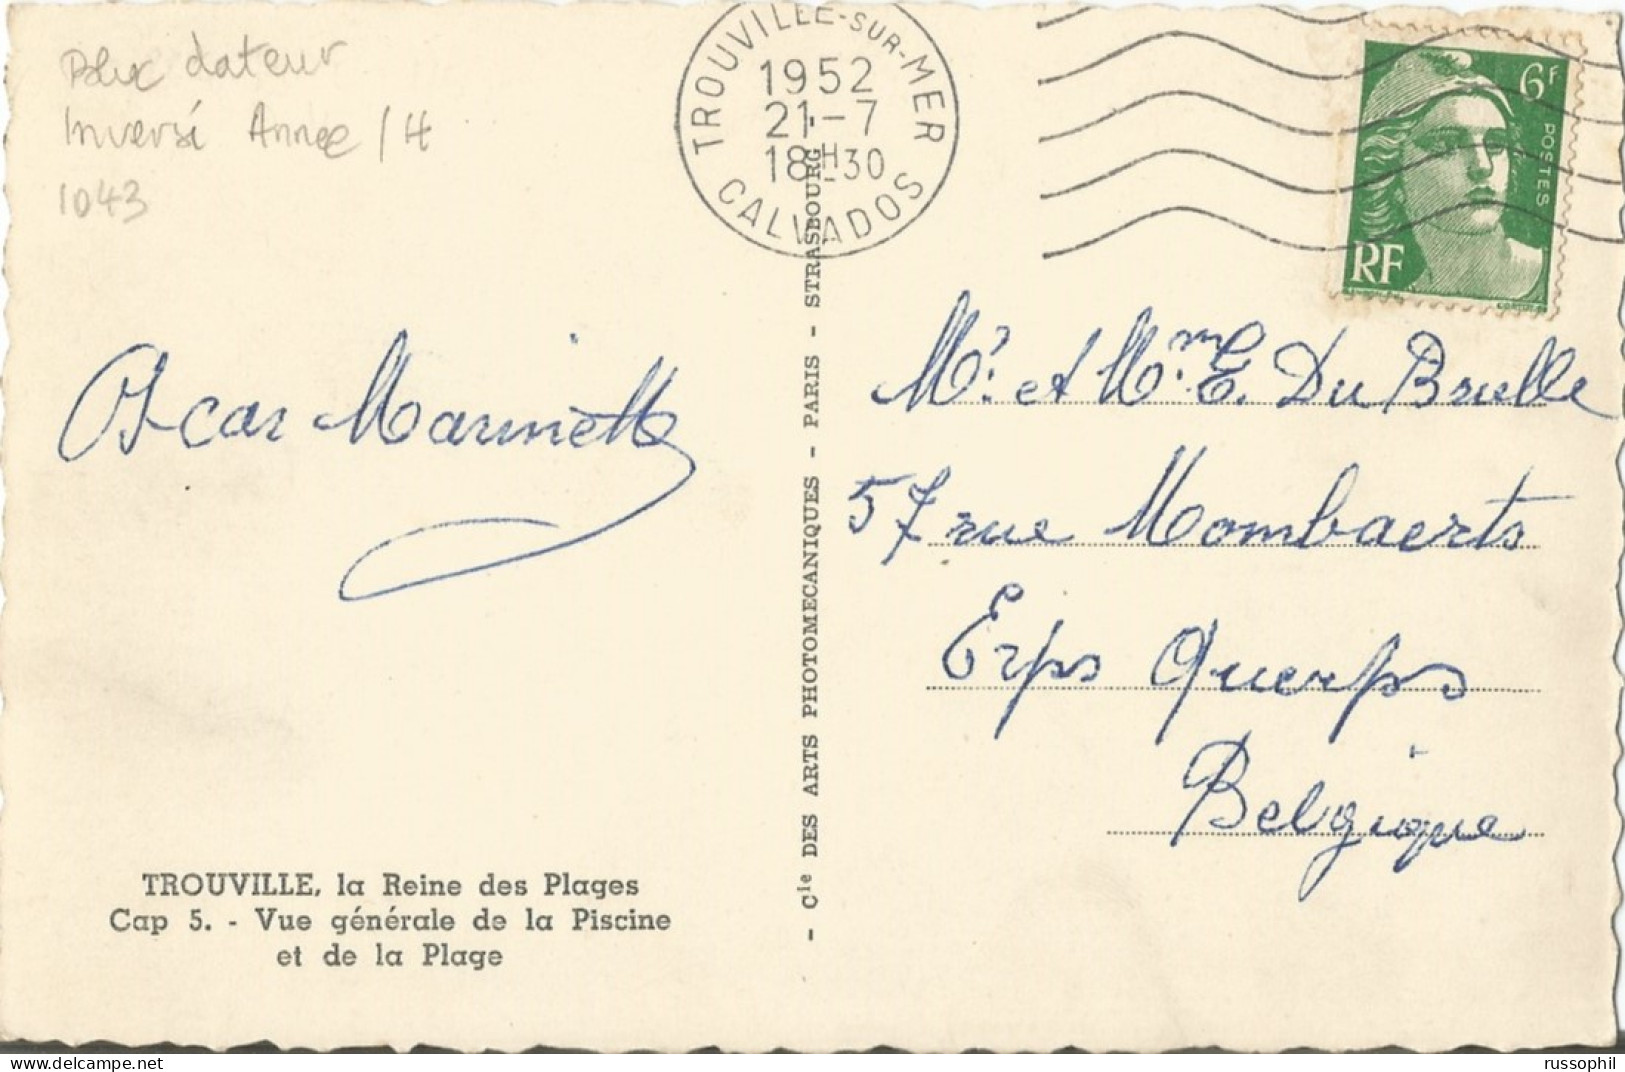 FRANCE -  VARIETY & CURIOSITY - 14 - WRONG ORDER YEAR /DAY- MONTH/ HOUR IN DATE BLOCK OF MUTE SECAP  "TROUVILLE"- 1952 - Storia Postale